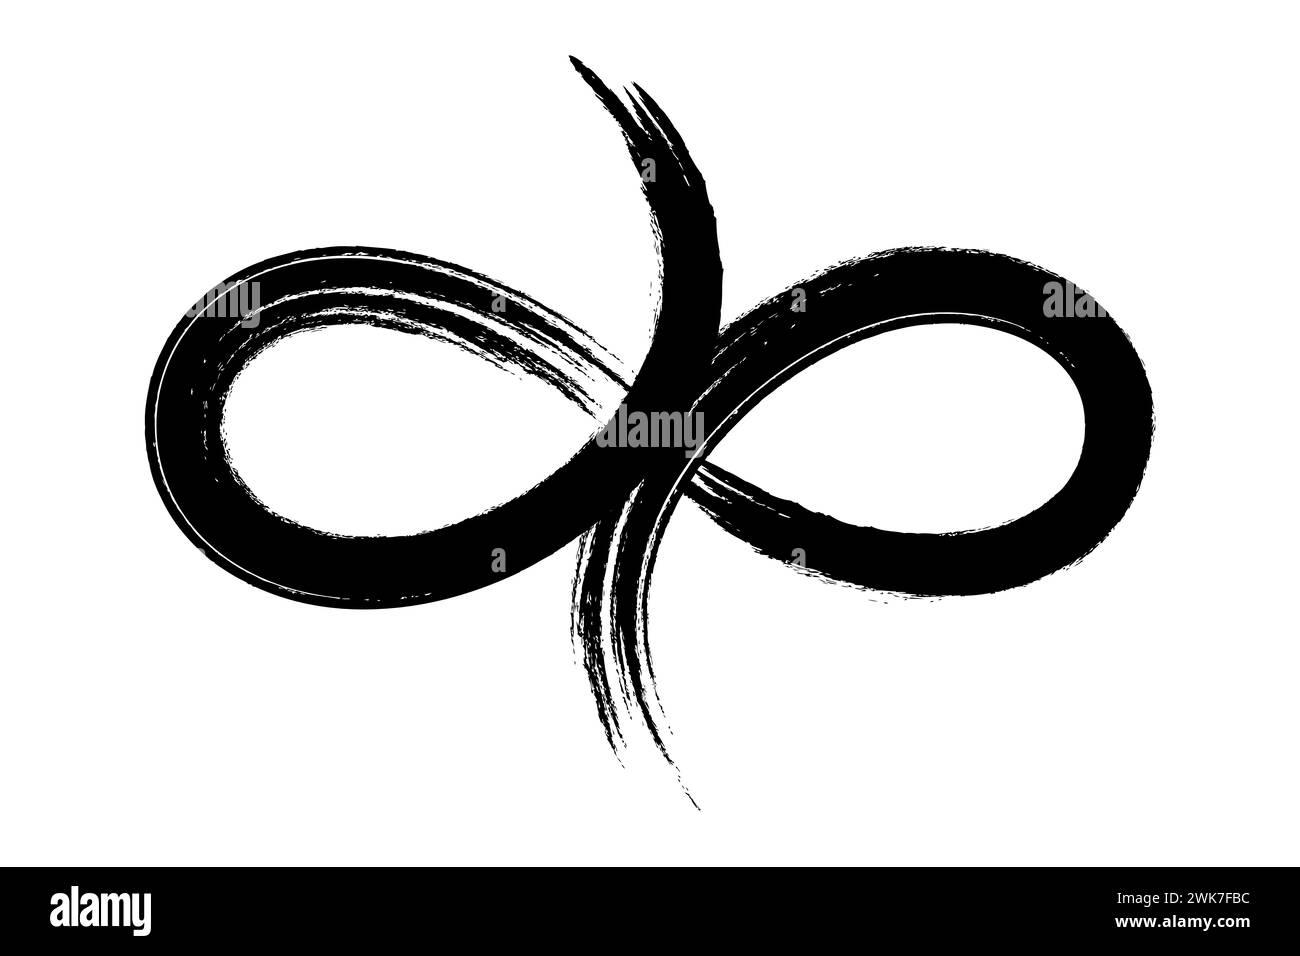 Calligraphic eternity symbol. Motif of a lying eight which is left open at the top and bottom, created with a single brushstroke. Stock Photo